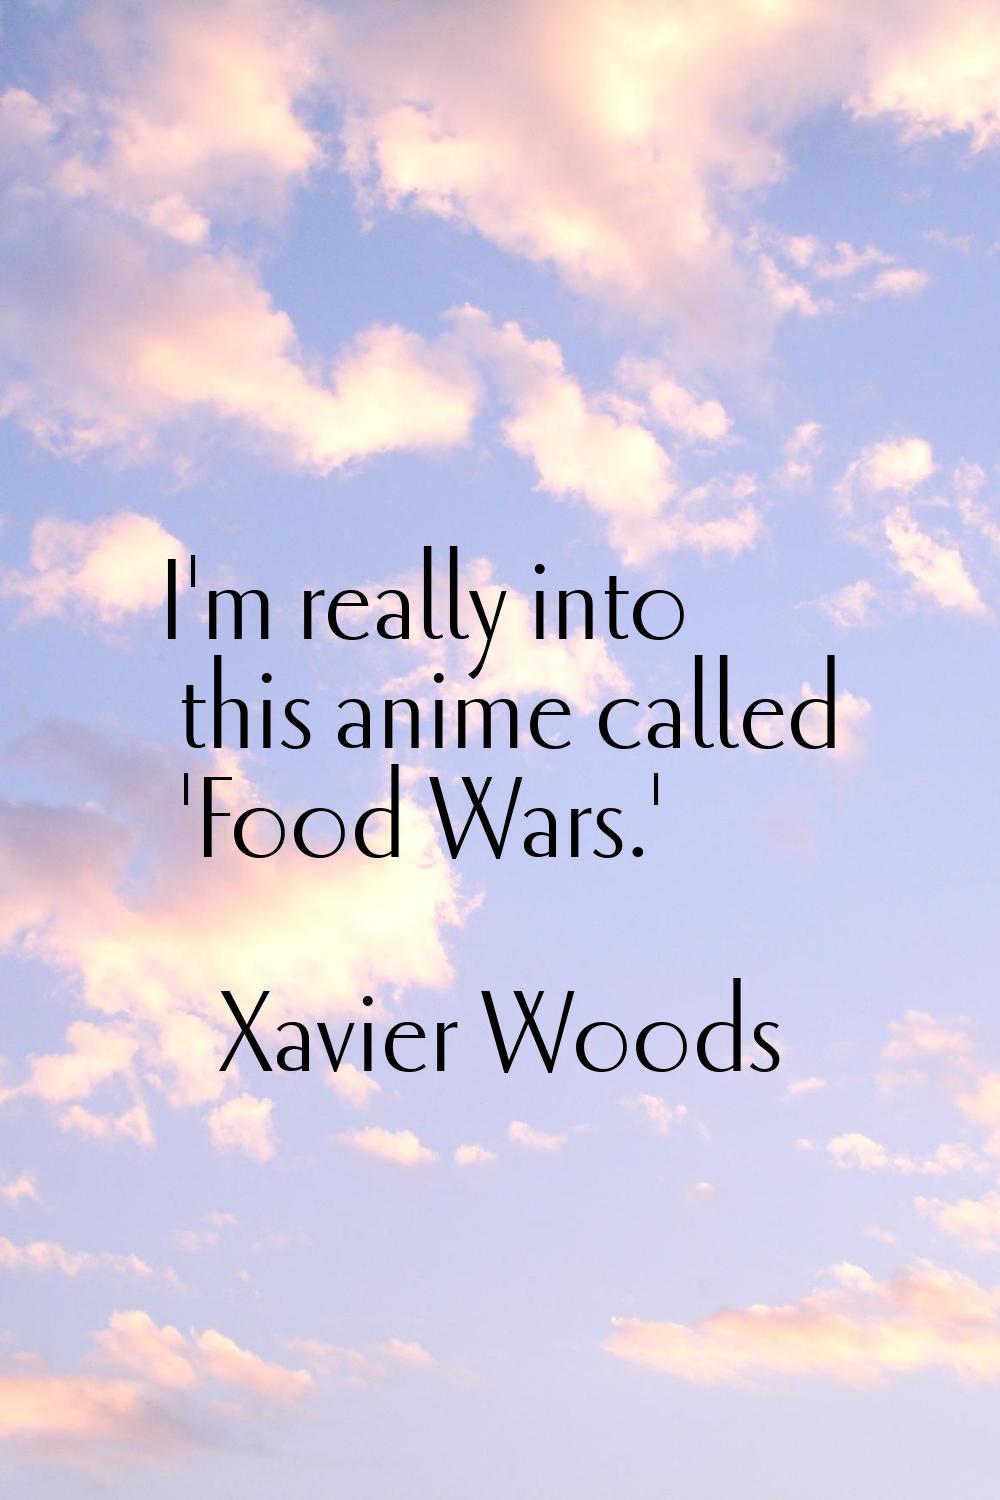 I'm really into this anime called 'Food Wars.'